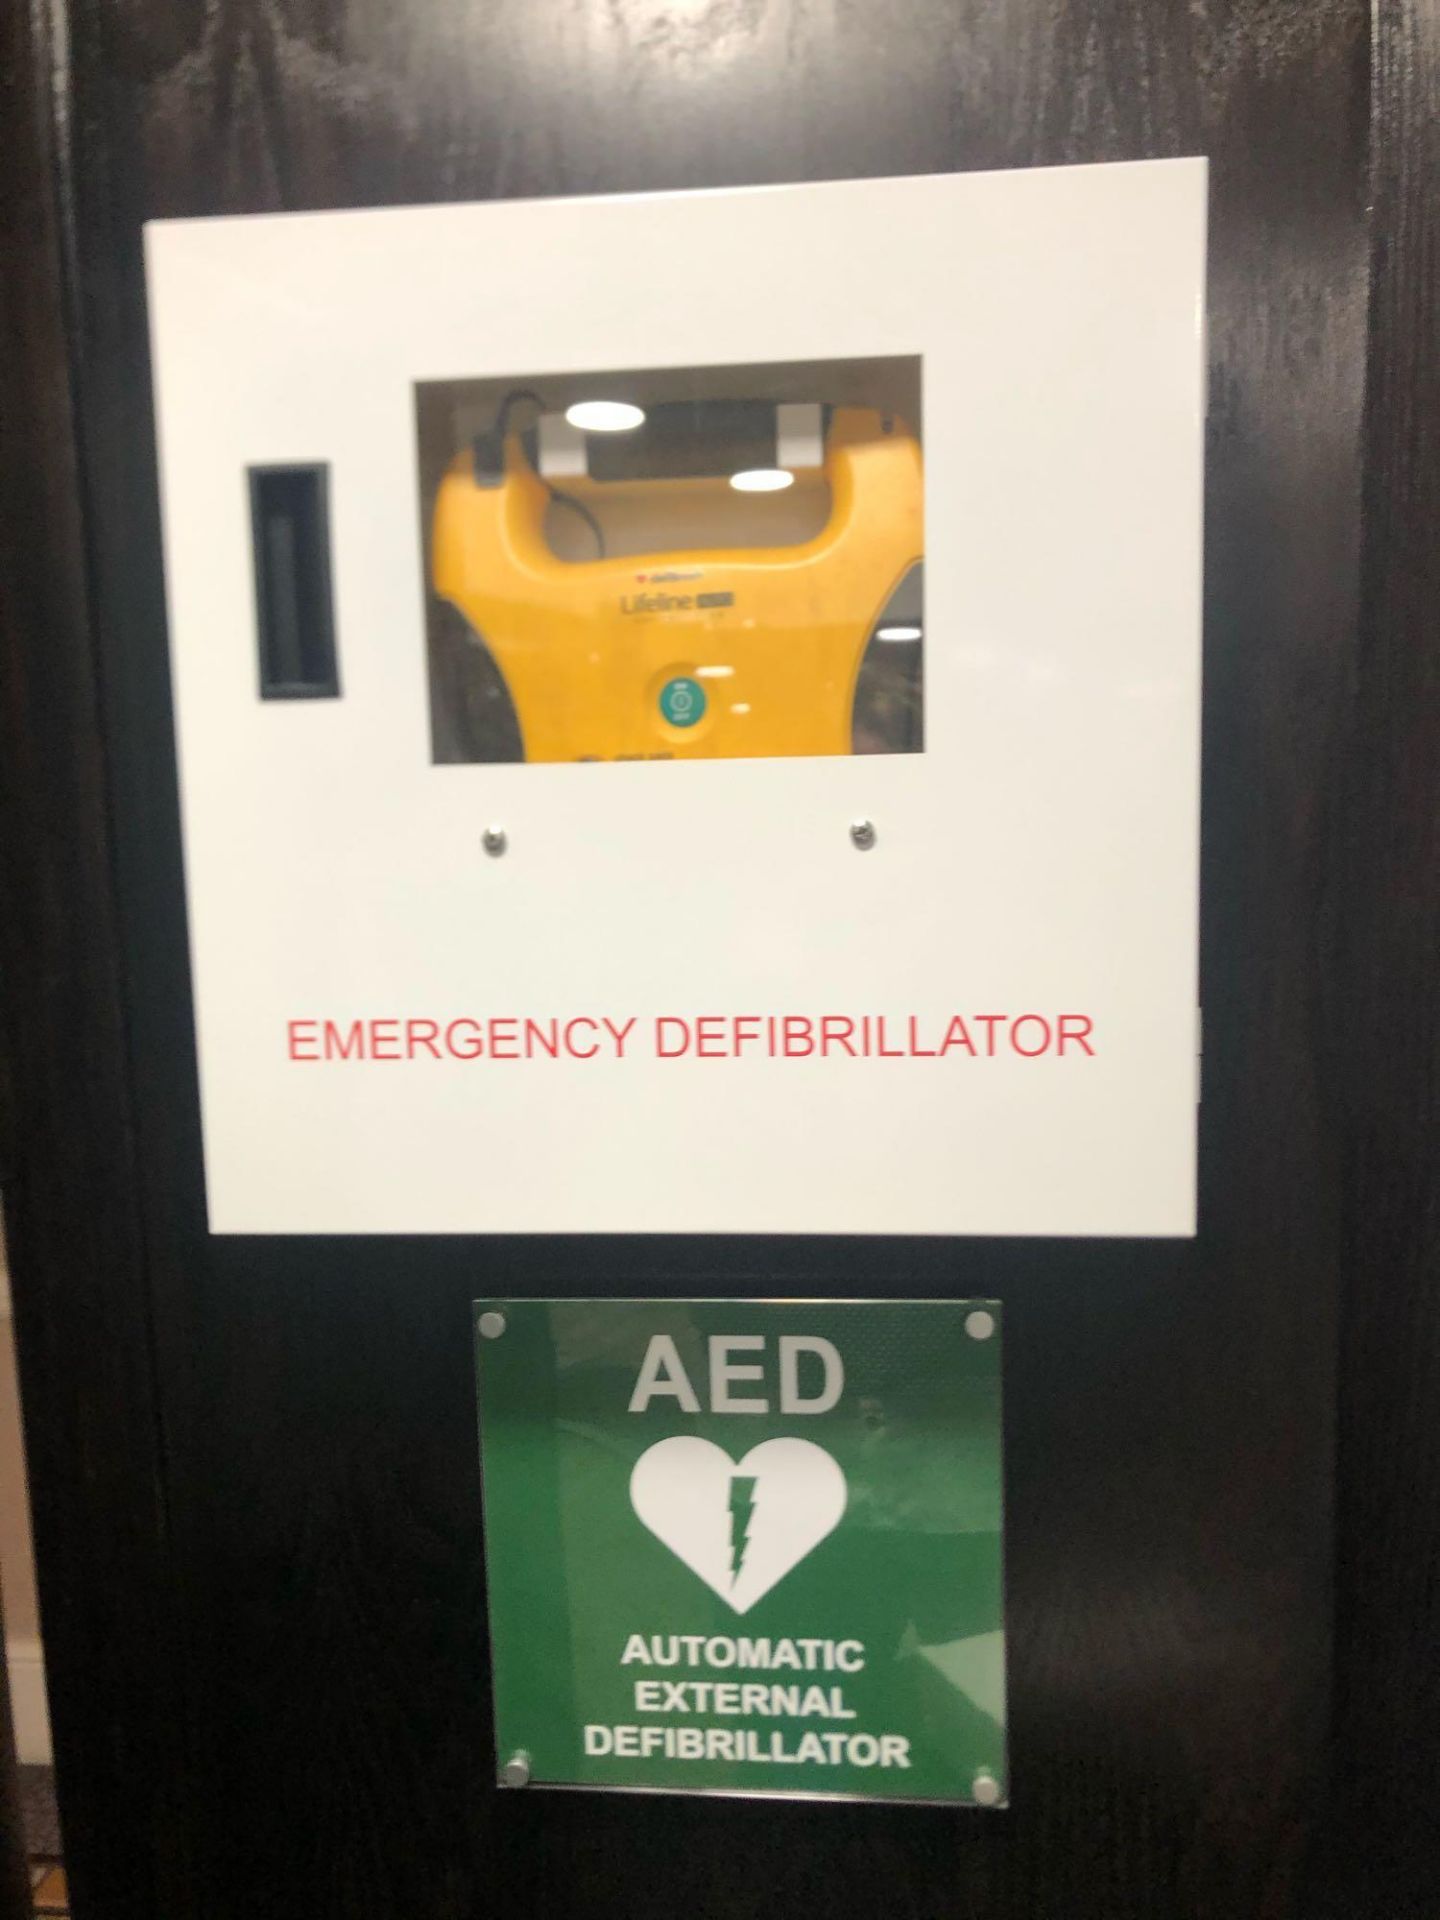 Defibtech Lifeline Auto Defibrillator With Emergency Defibrillator Secure Box And AED Automatic Ex